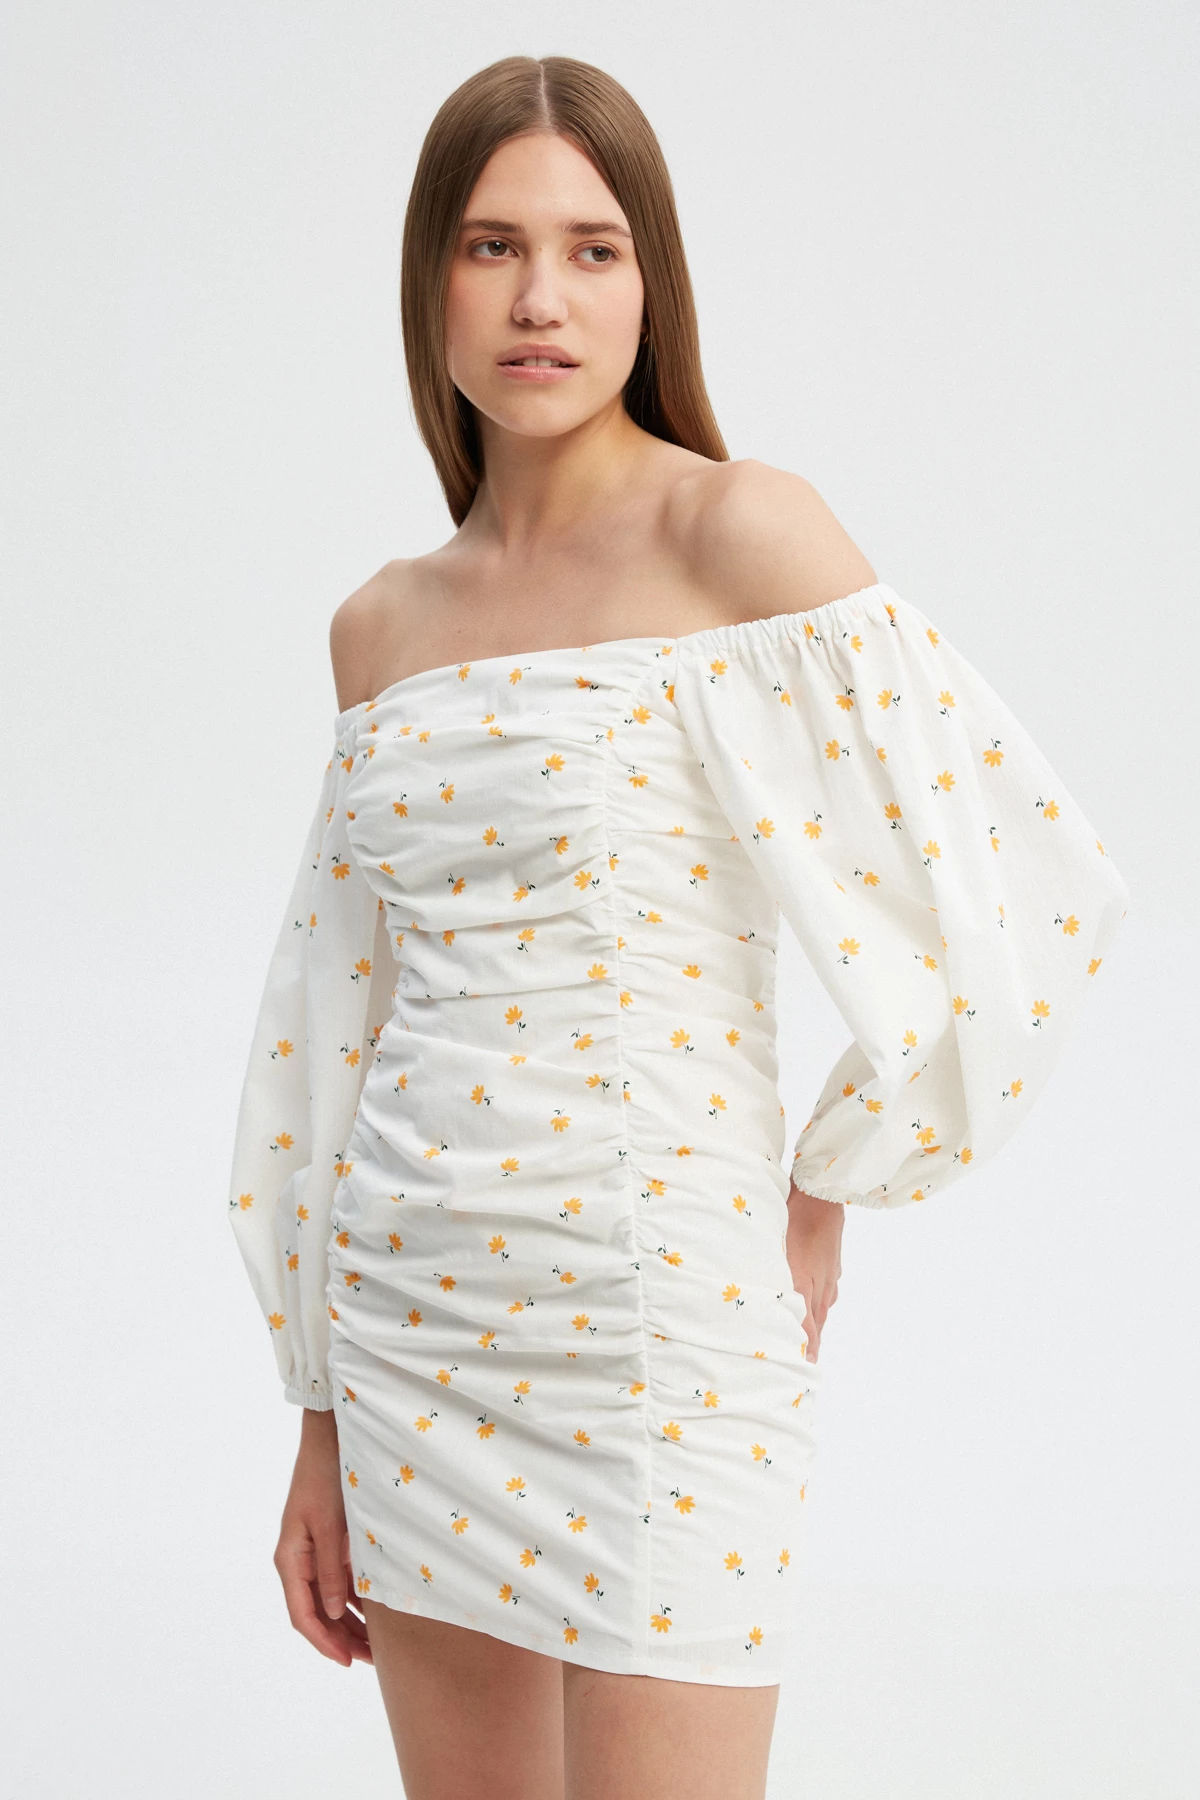 White cotton drapered dress with yellow flowers print, photo 2